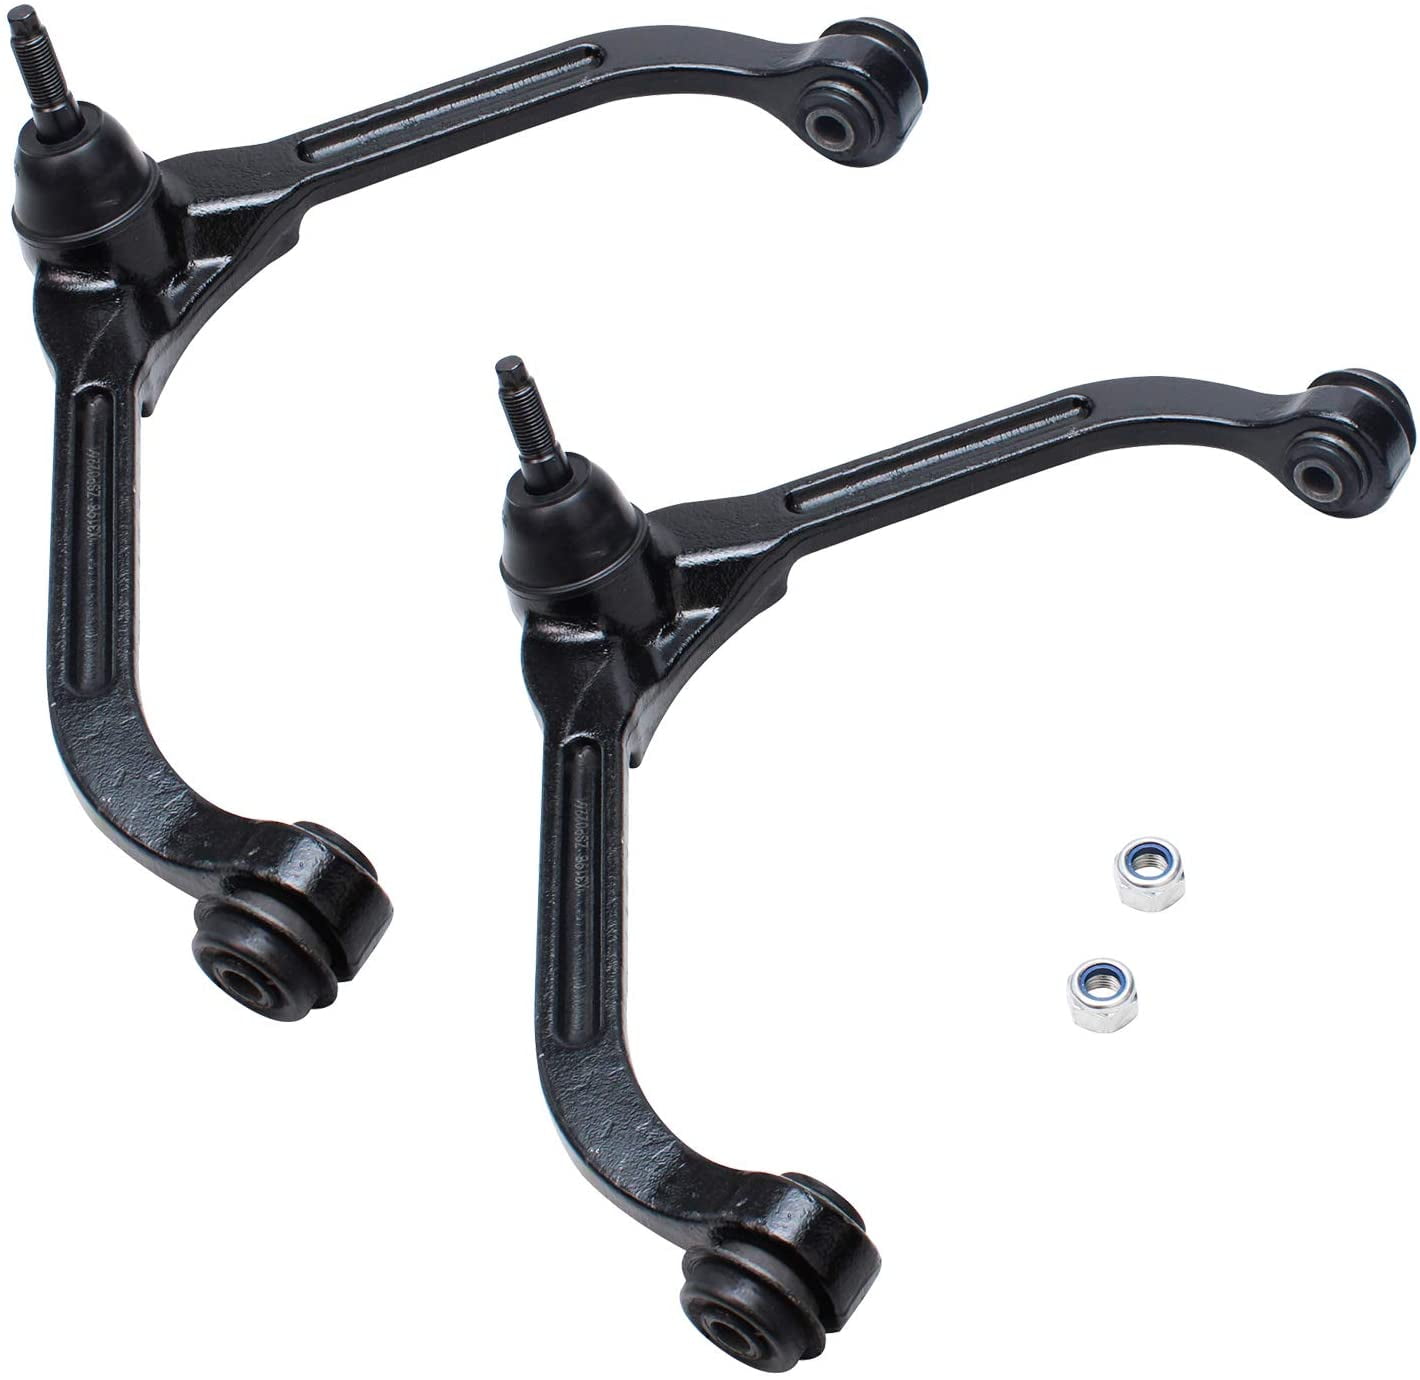 Detroit Axle No Air Suspension Models 8pc Front Upper Control Arms Sway Bars and Outer Tie Rod Kit for 2003 2004 2005 Ford Expedition Built Before 12/04 Lower Ball Joints 